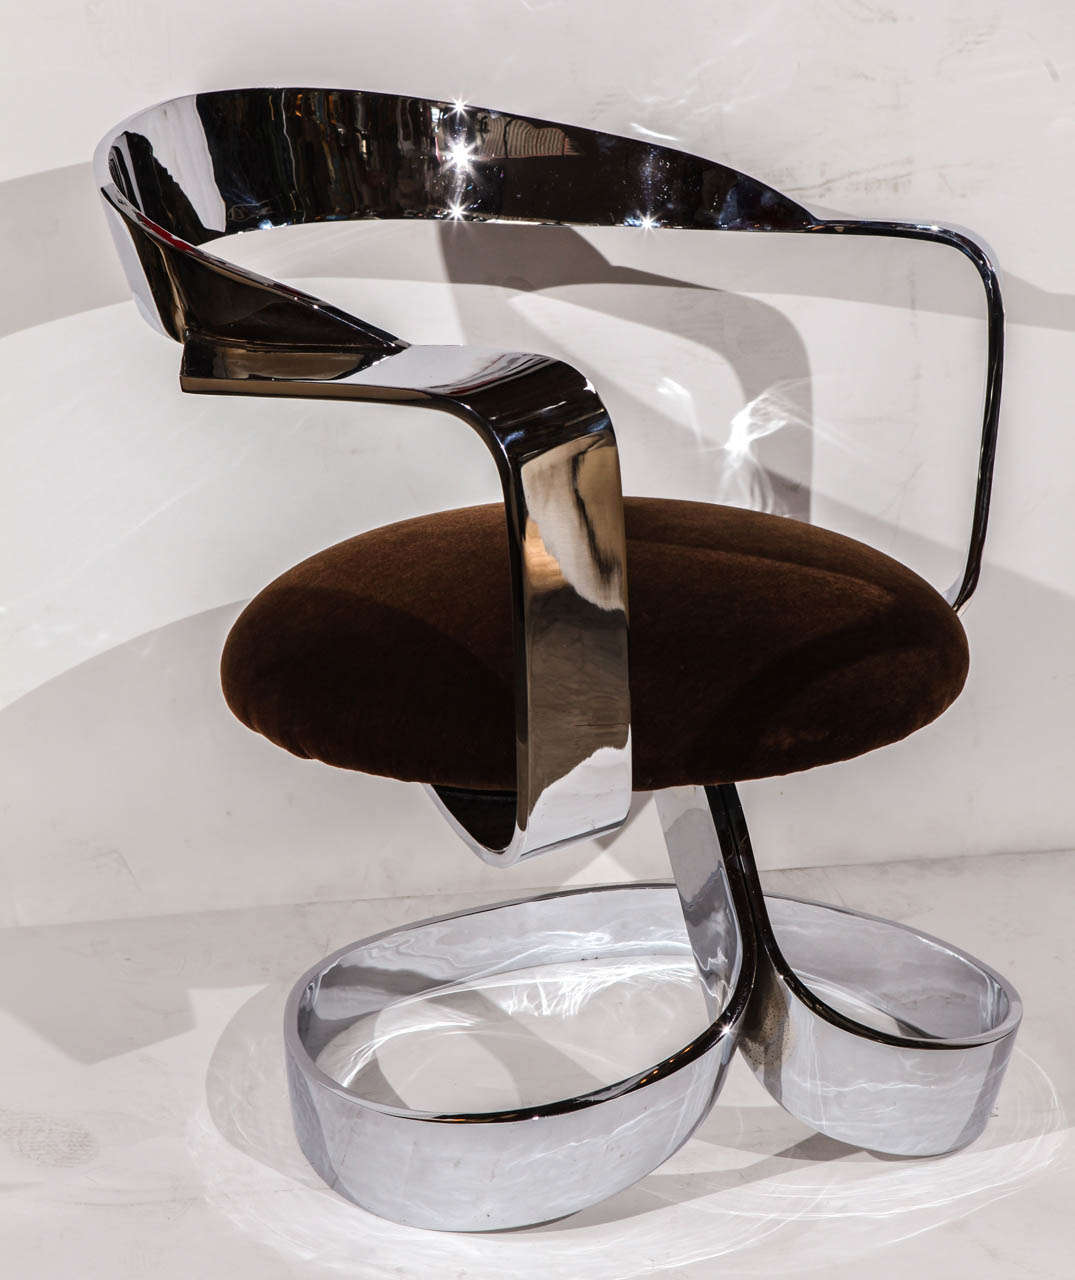 An amazing polished chrome plated steel ribbon chair. Chair seat is upholstered in a dark brown mohair and swivels.